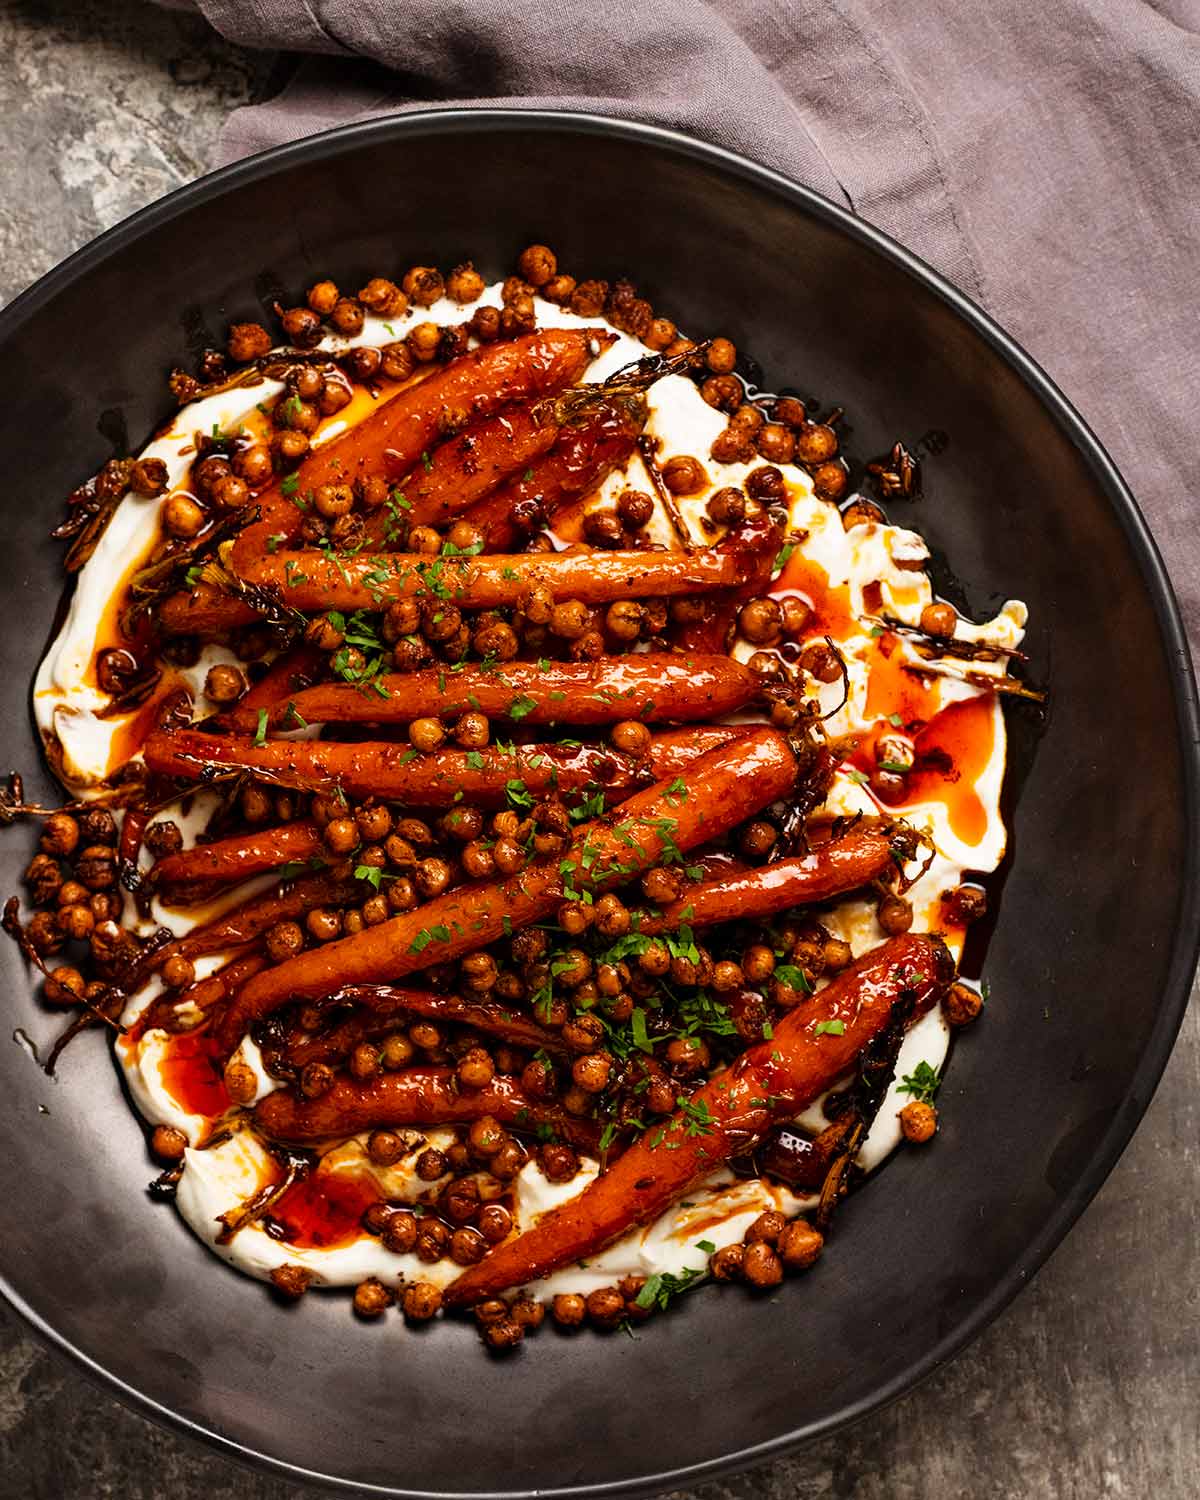 Spicy maple roasted carrots with crispy chickpeas with yogurt sauce ready to serve